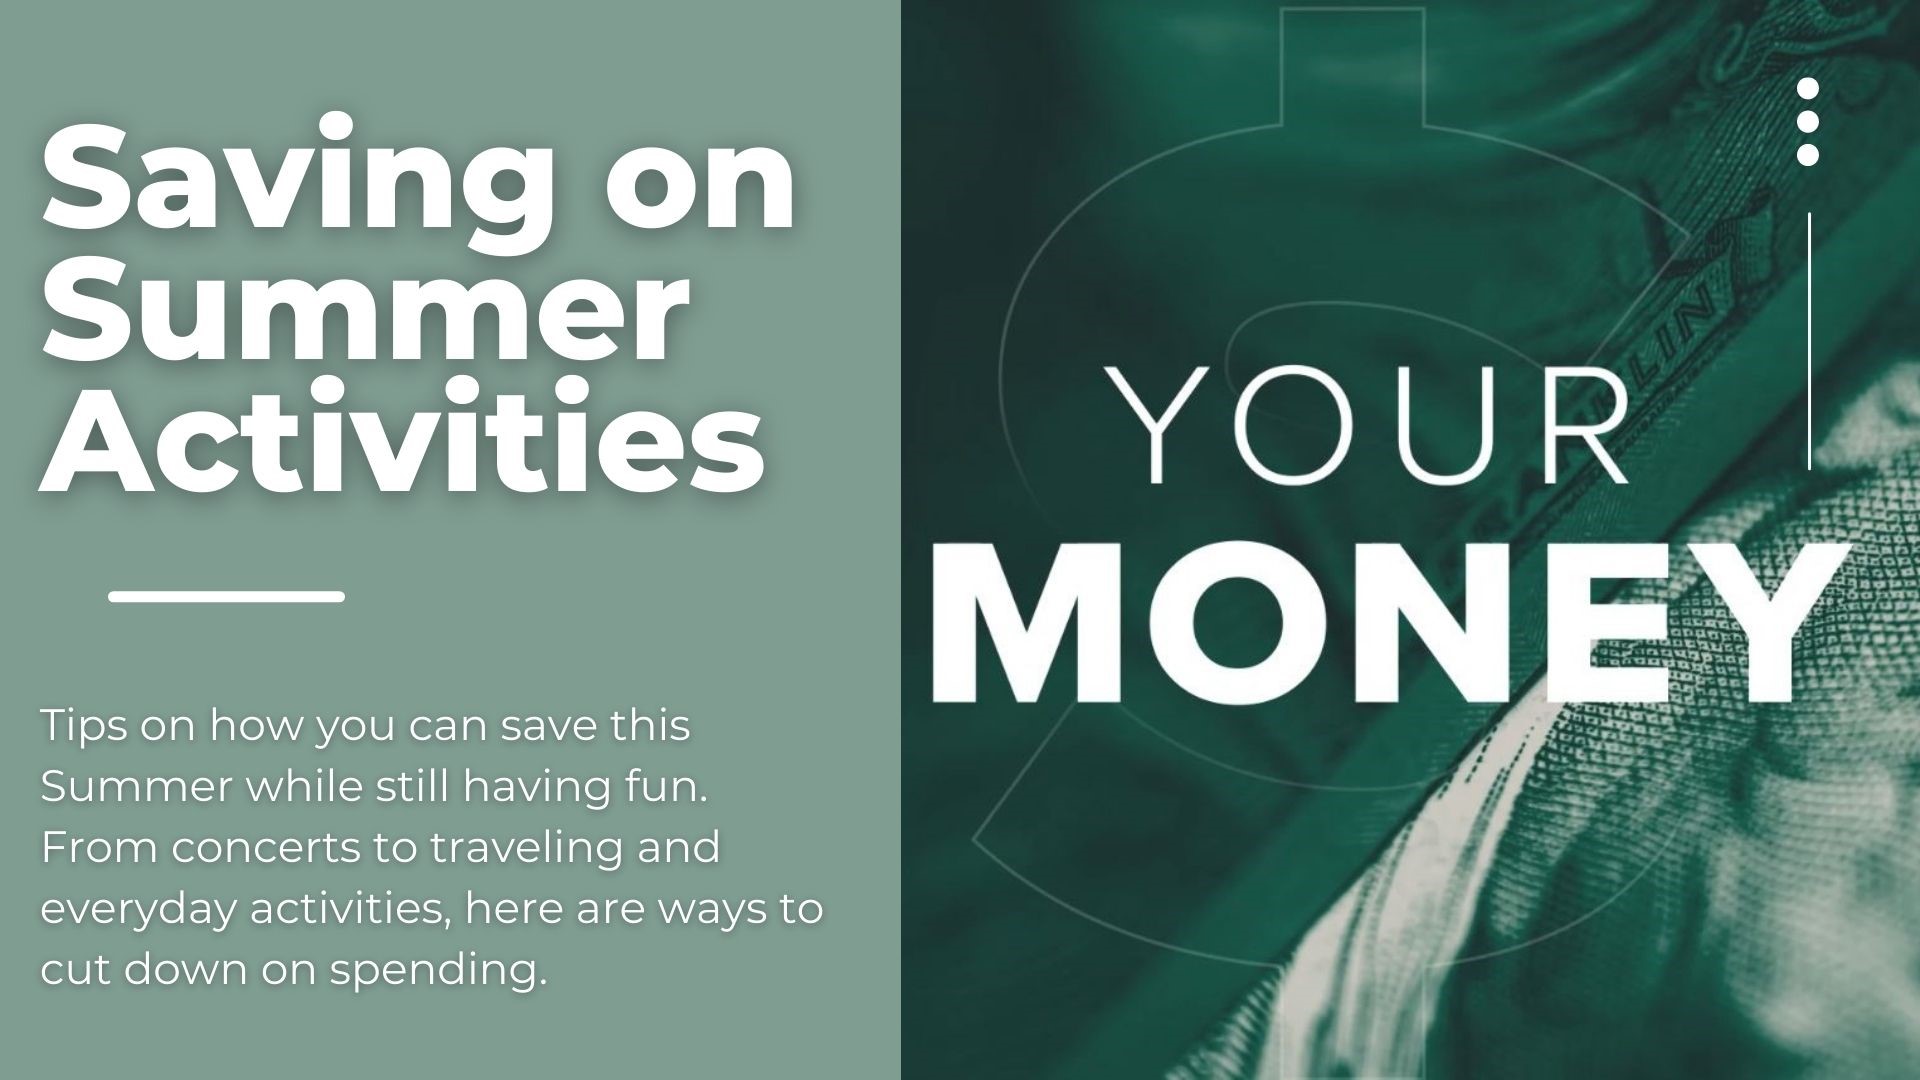 Tips on how you can save this Summer while still having fun. From concerts to traveling and everyday activities, here are ways to cut down on spending.